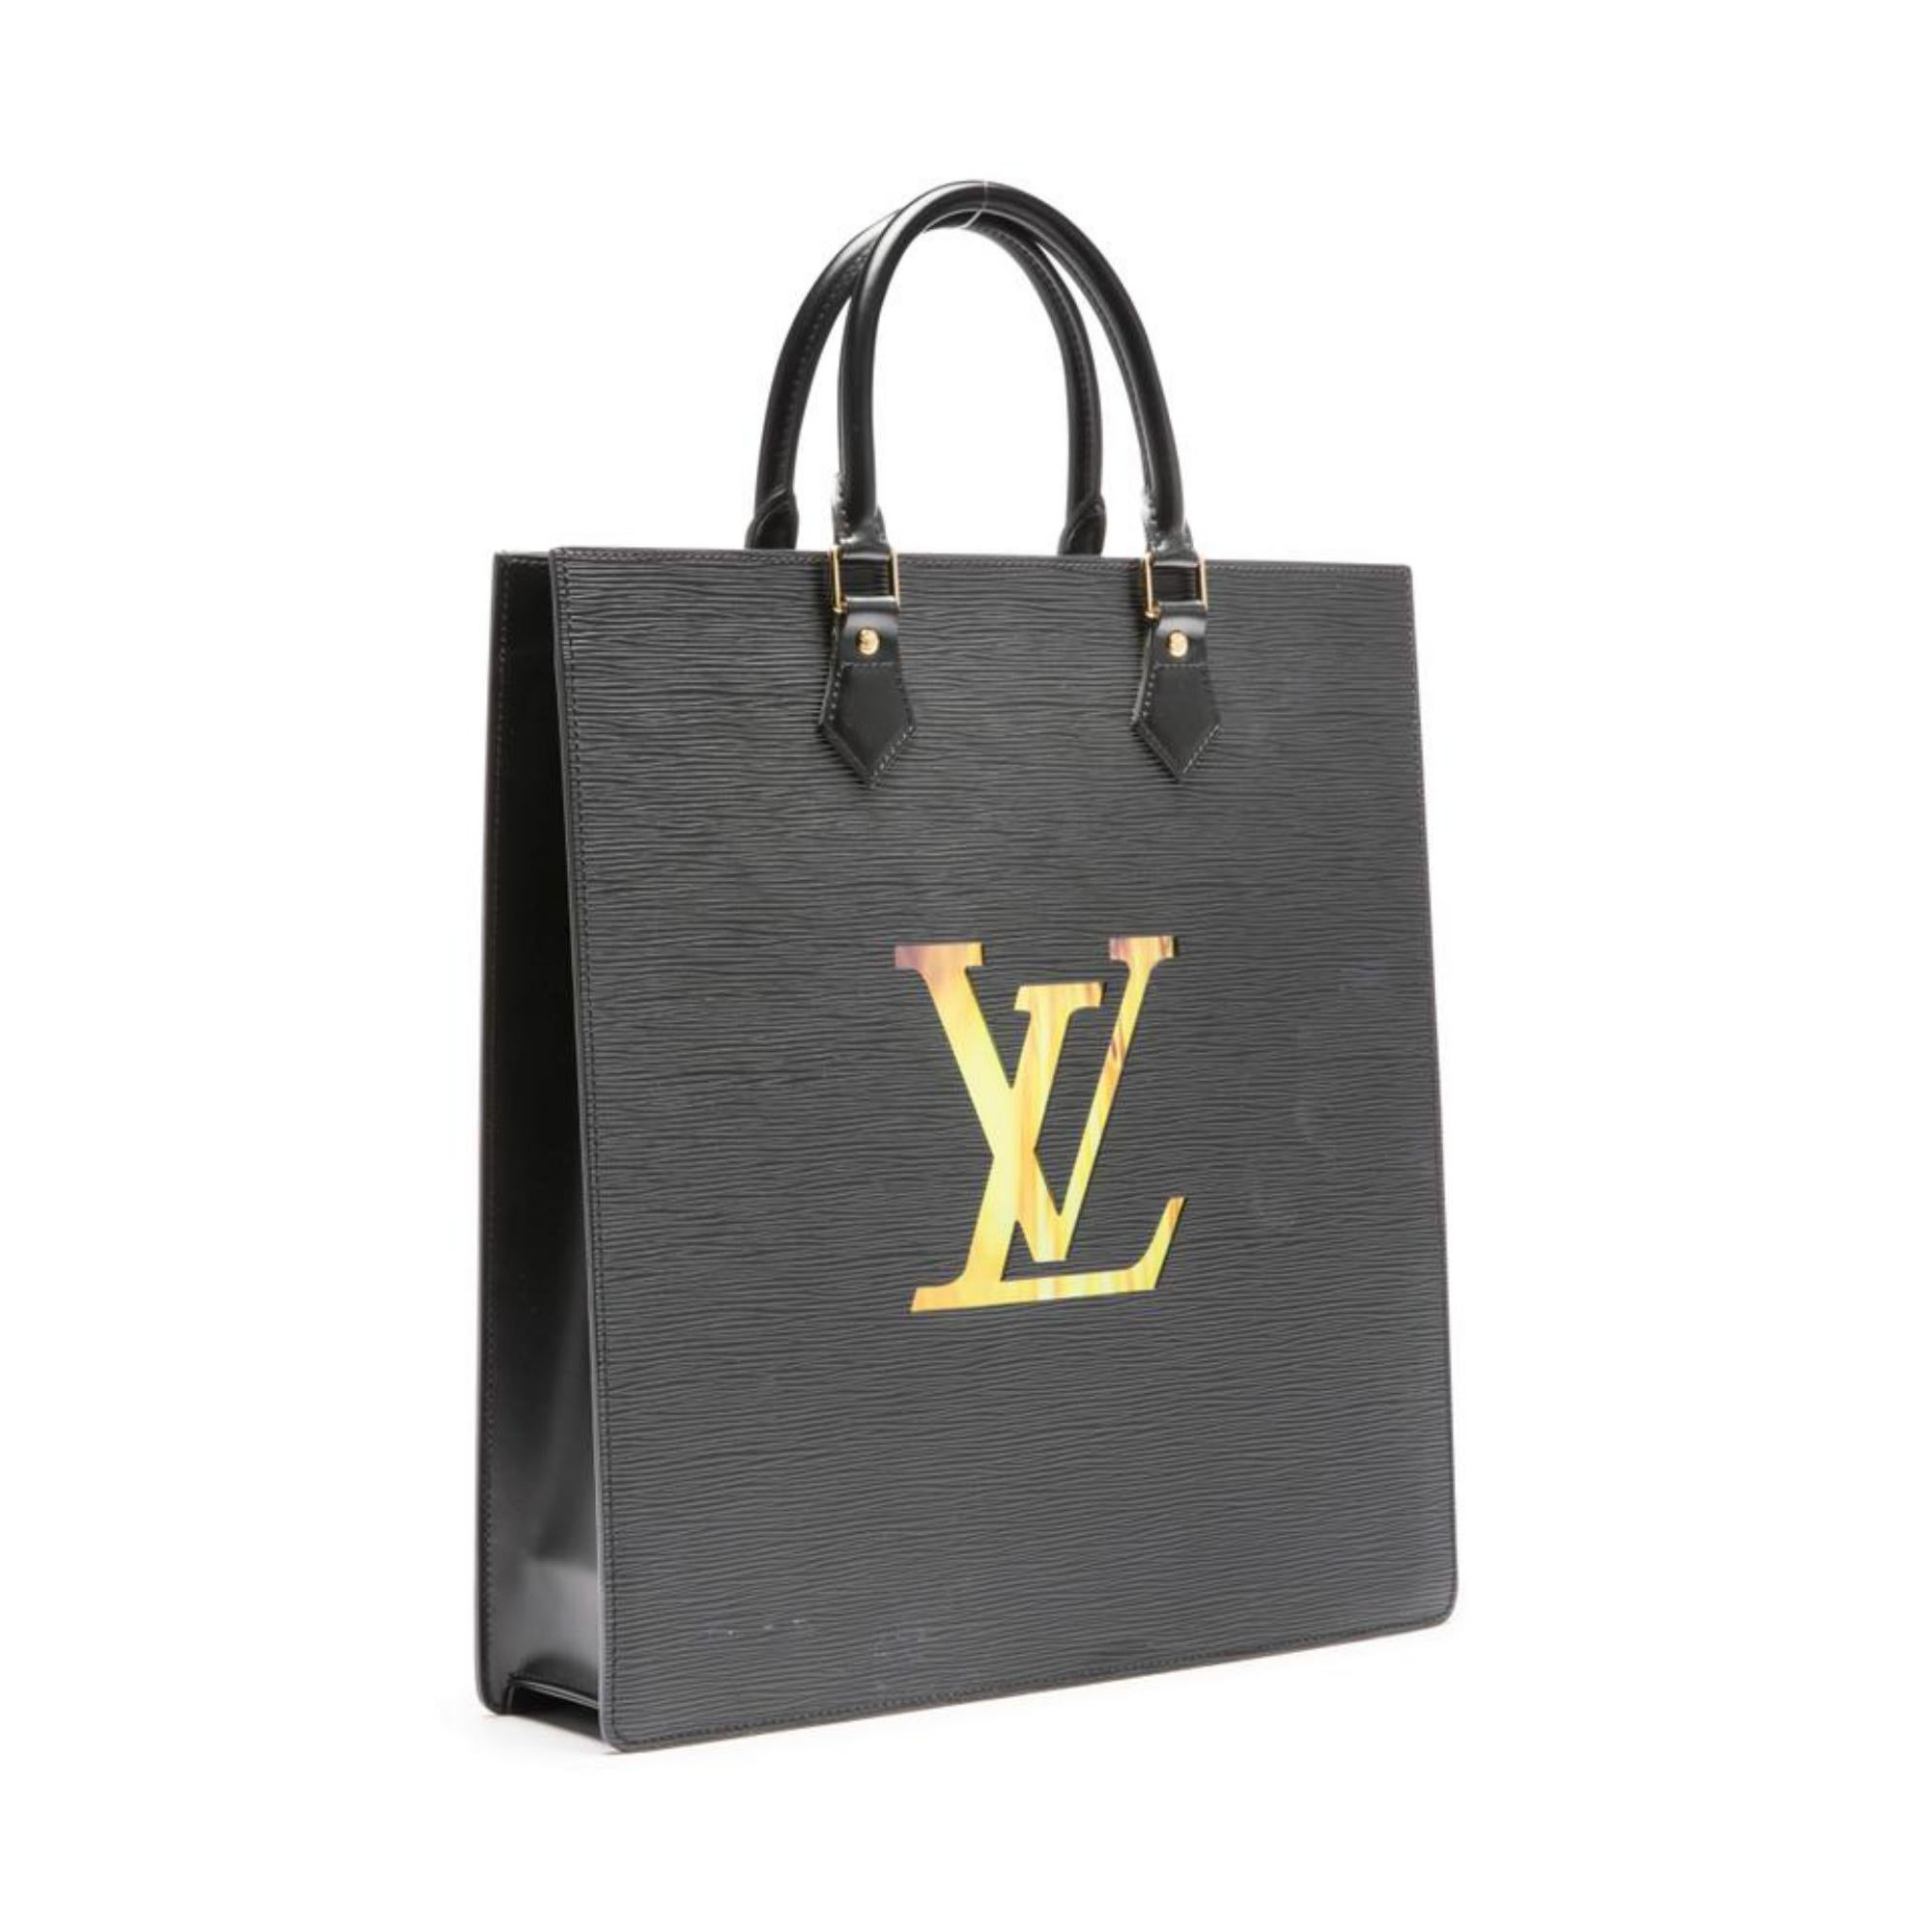 Louis Vuitton LV x Fabrizio Plessi Black Epi Leather Sac Plat Fusion LCD Tote 112lv2
Date Code/Serial Number: MB6690
Measurements: Length:  13